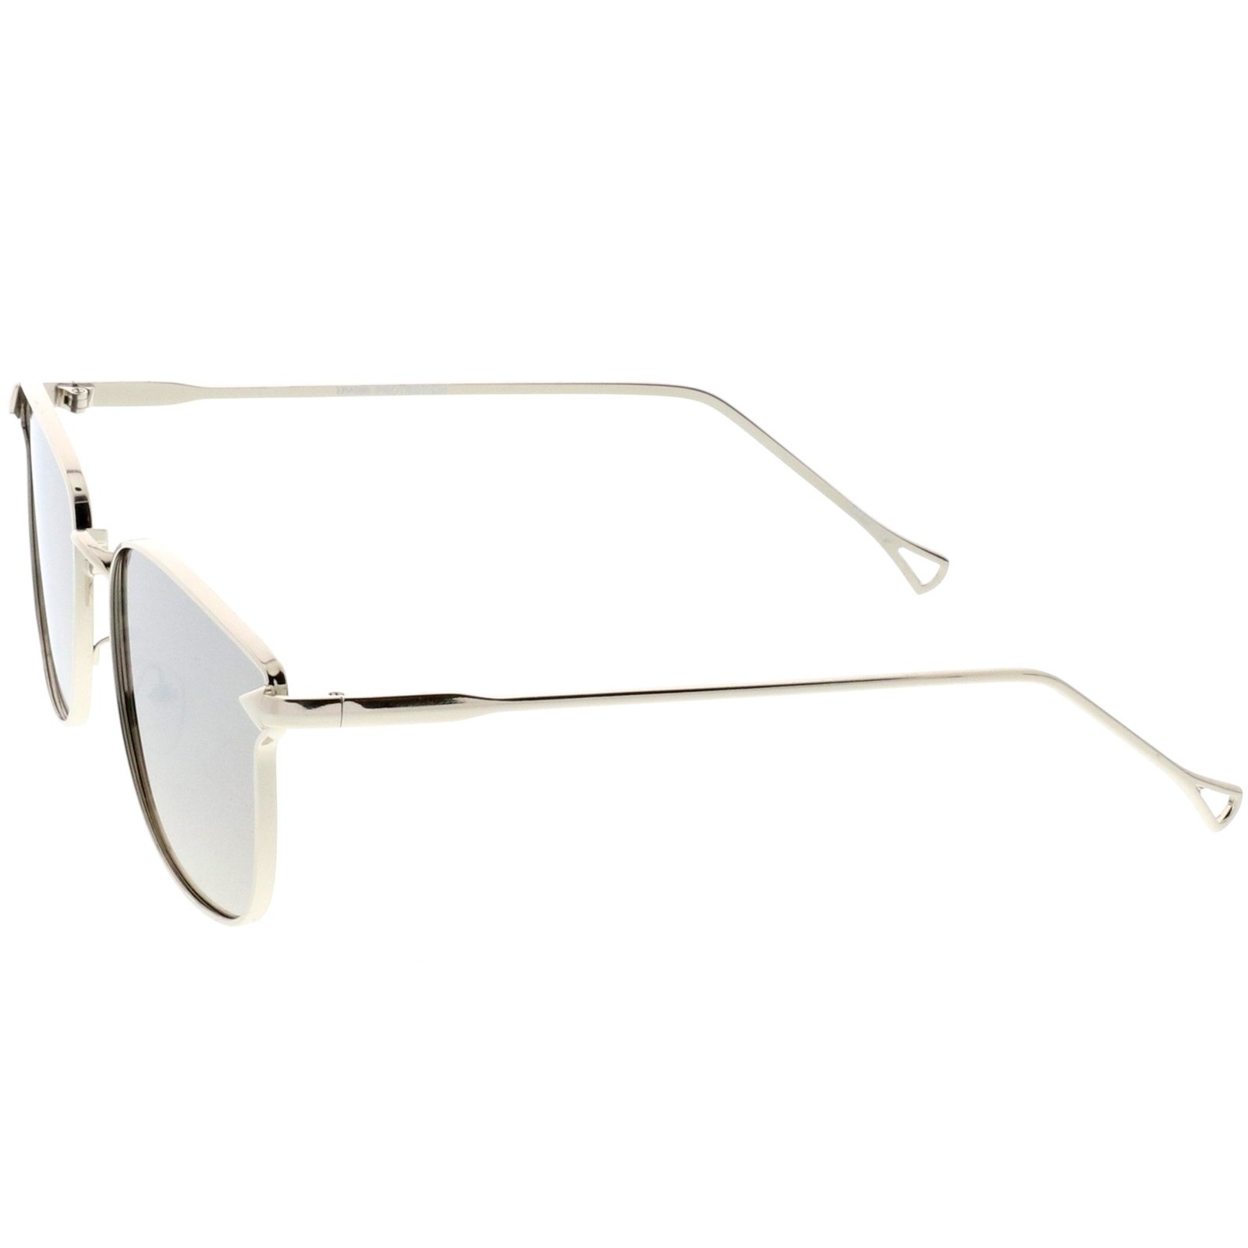 Modern Metal Square Sunglasses With Mirrored Flat Lenses And Slim Hook Arms 55mm - Silver / Blue Mirror